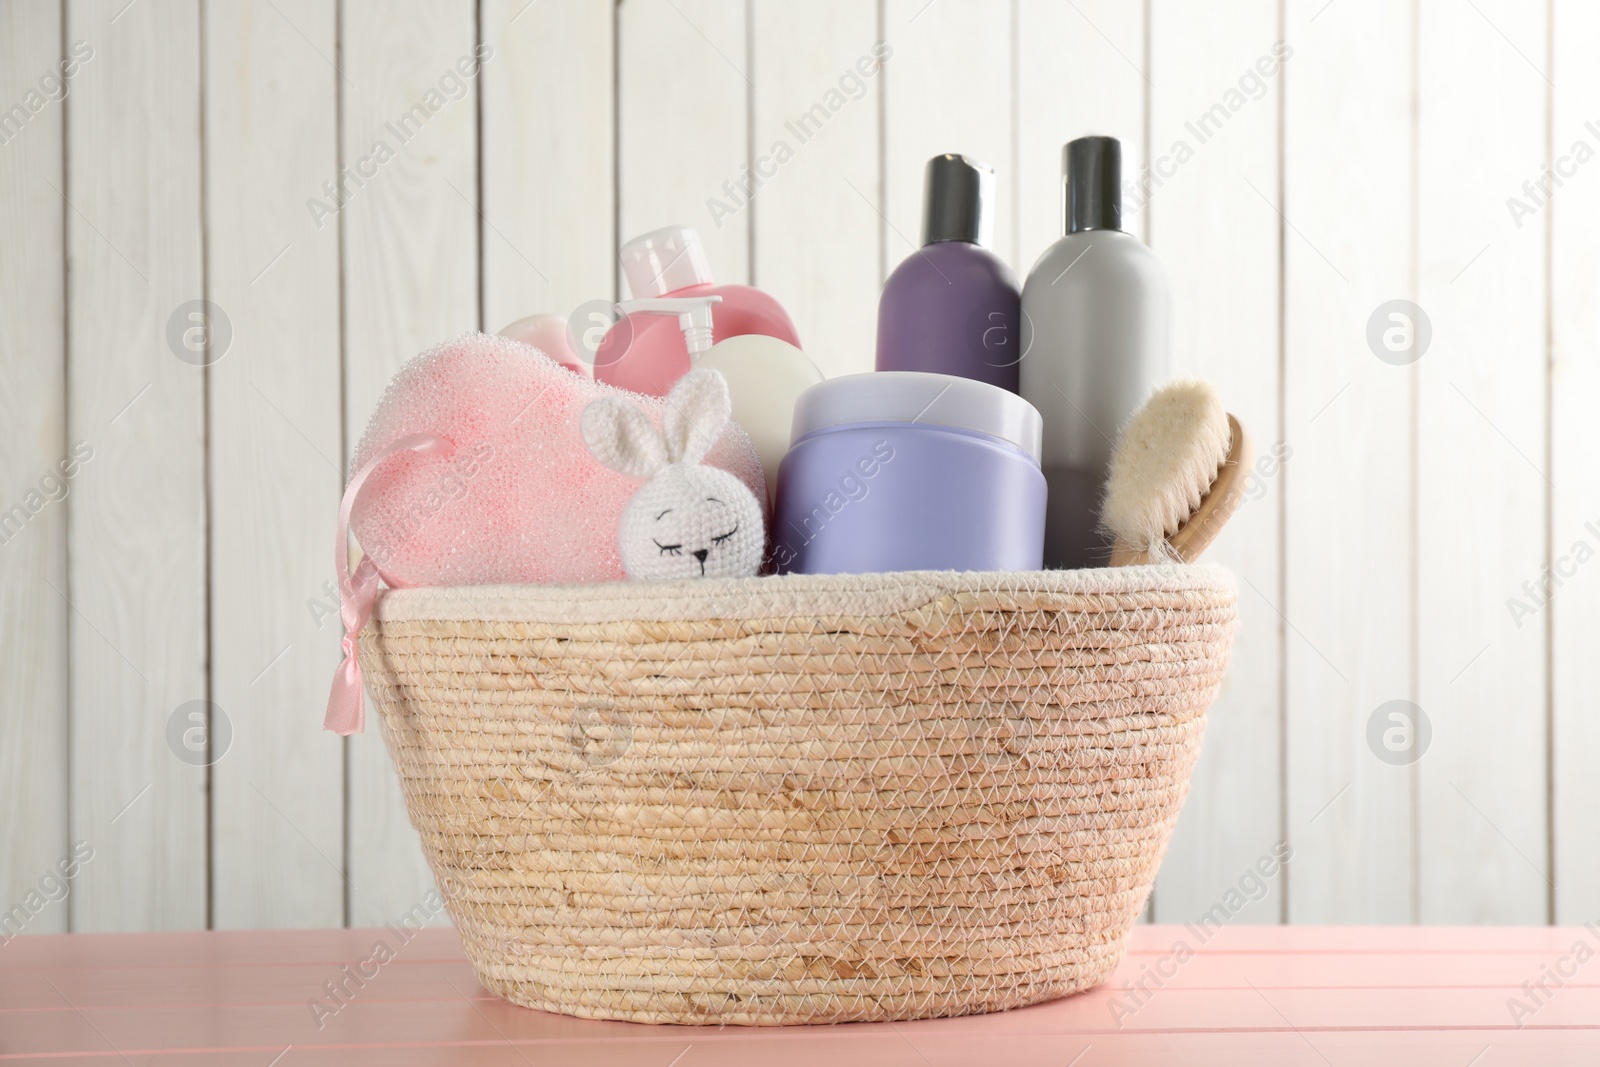 Photo of Wicker basket full of different baby cosmetic products, accessories and toy on pink wooden table